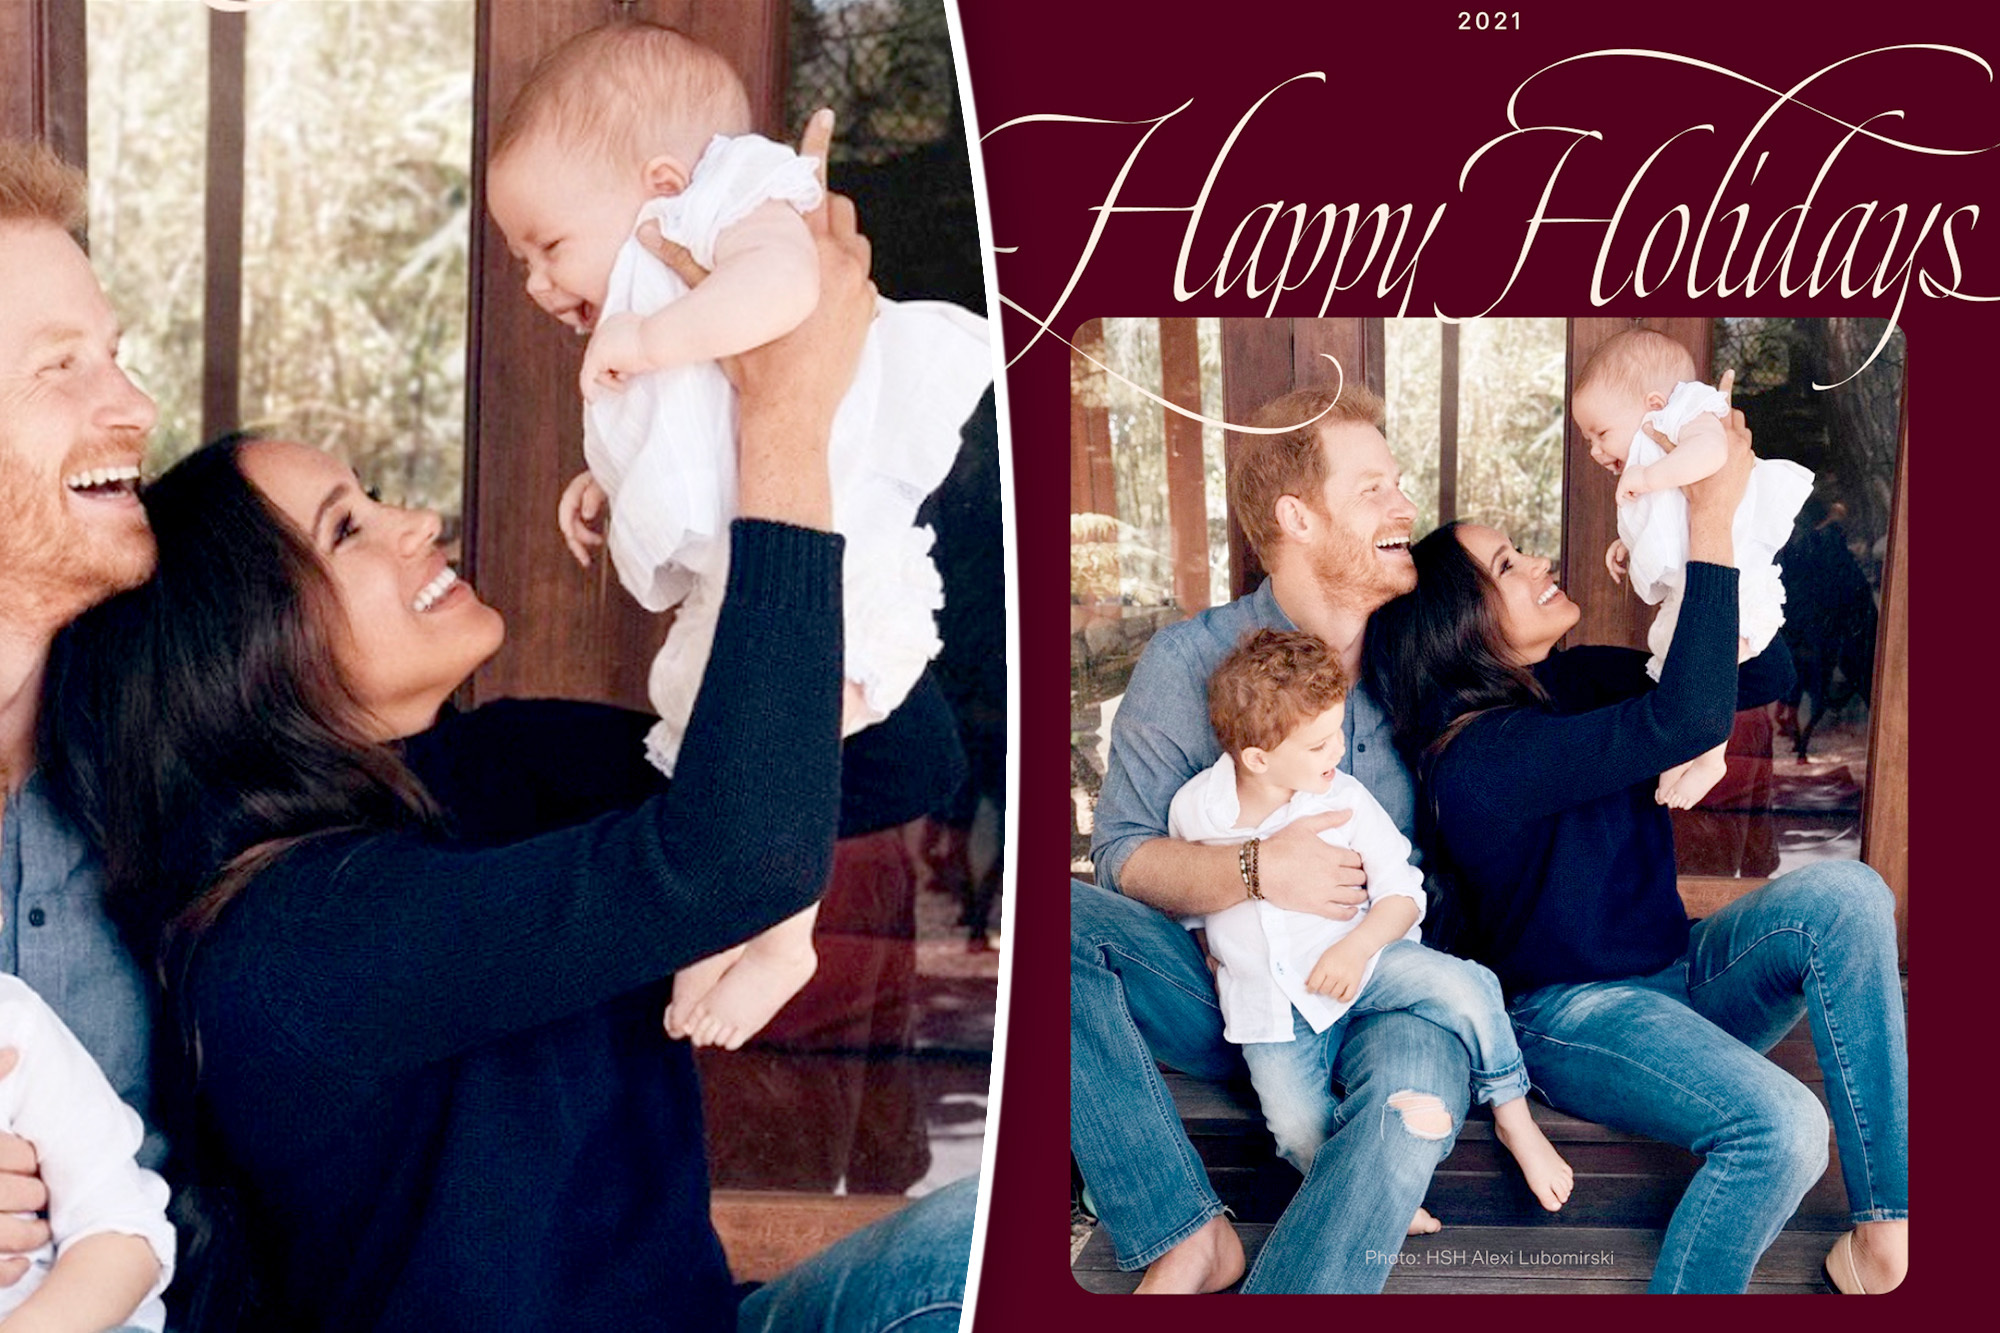 Meghan Markle, Prince Harry share first photo of baby Lilibet on Christmas card